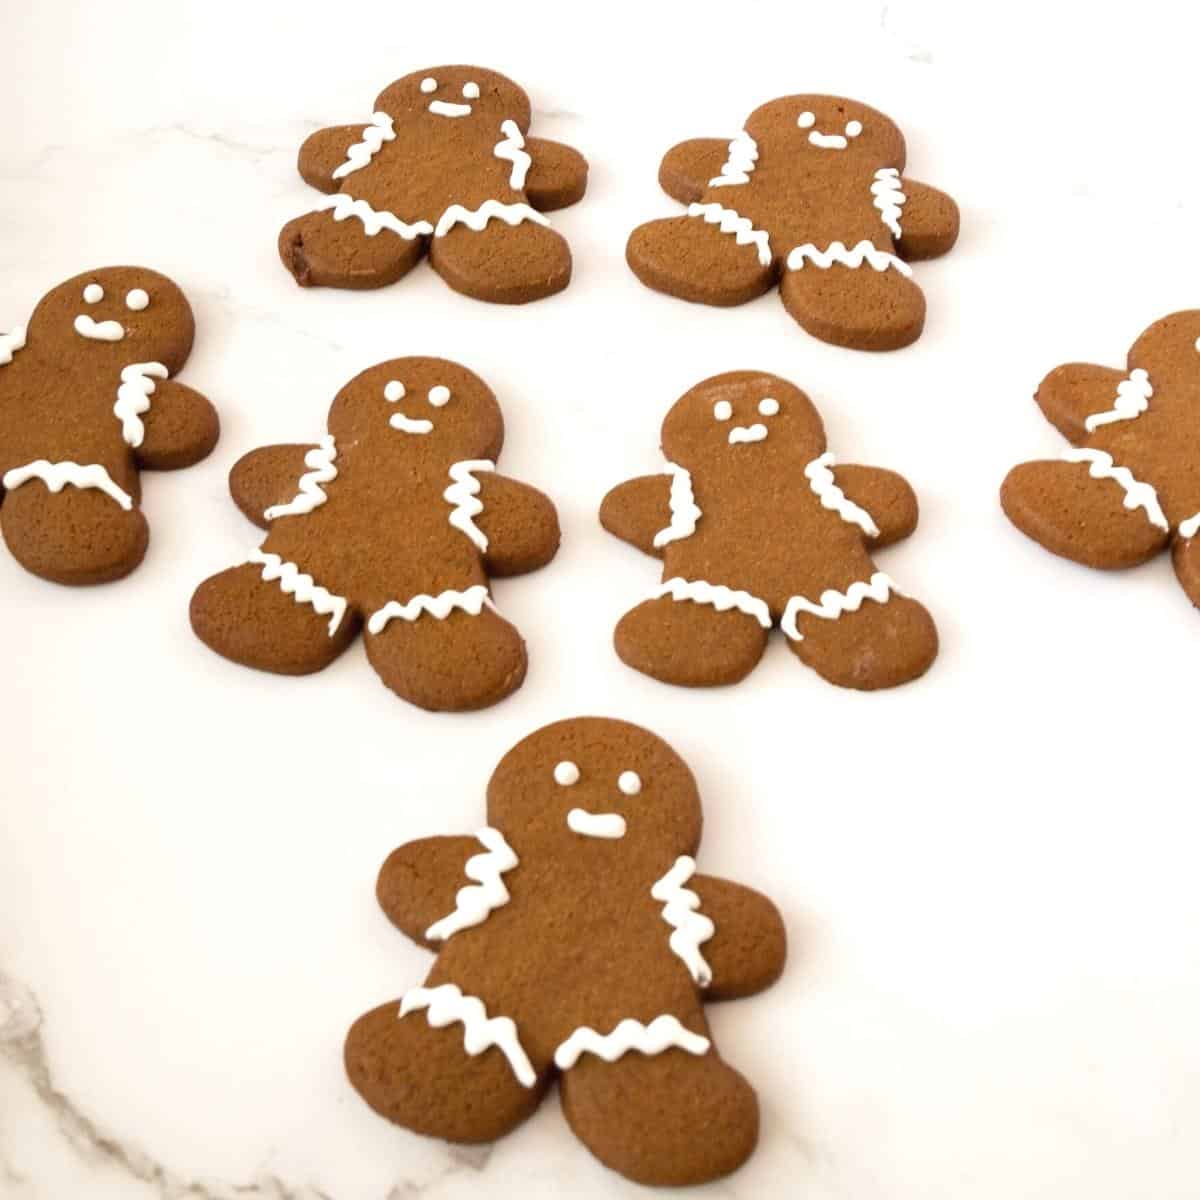 Frosted gingerbread men on a white table.